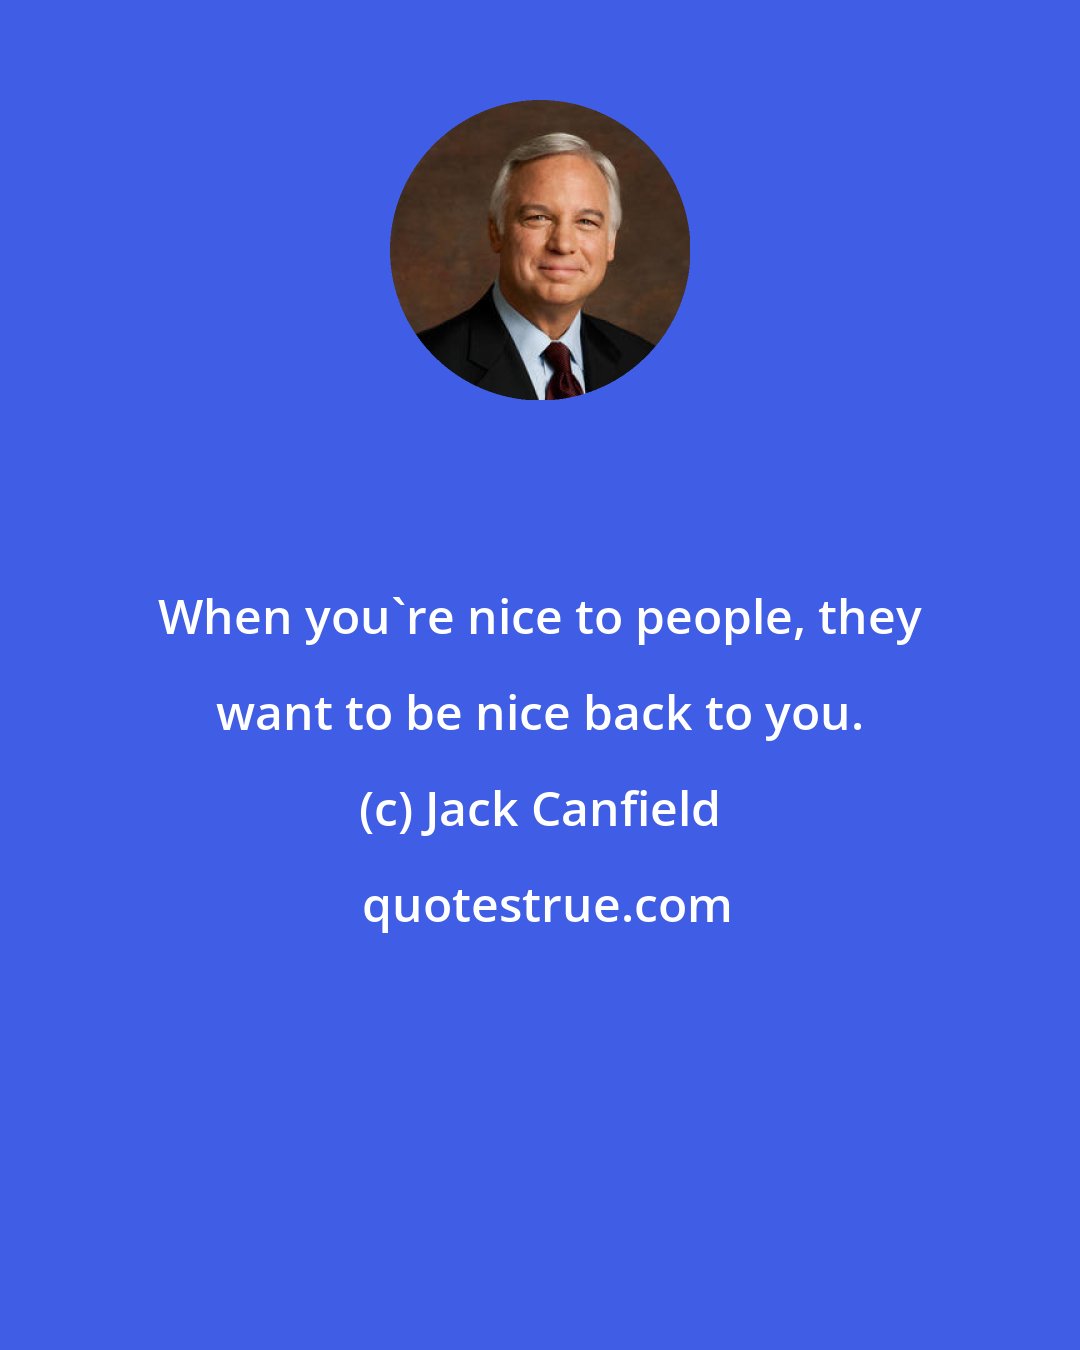 Jack Canfield: When you're nice to people, they want to be nice back to you.